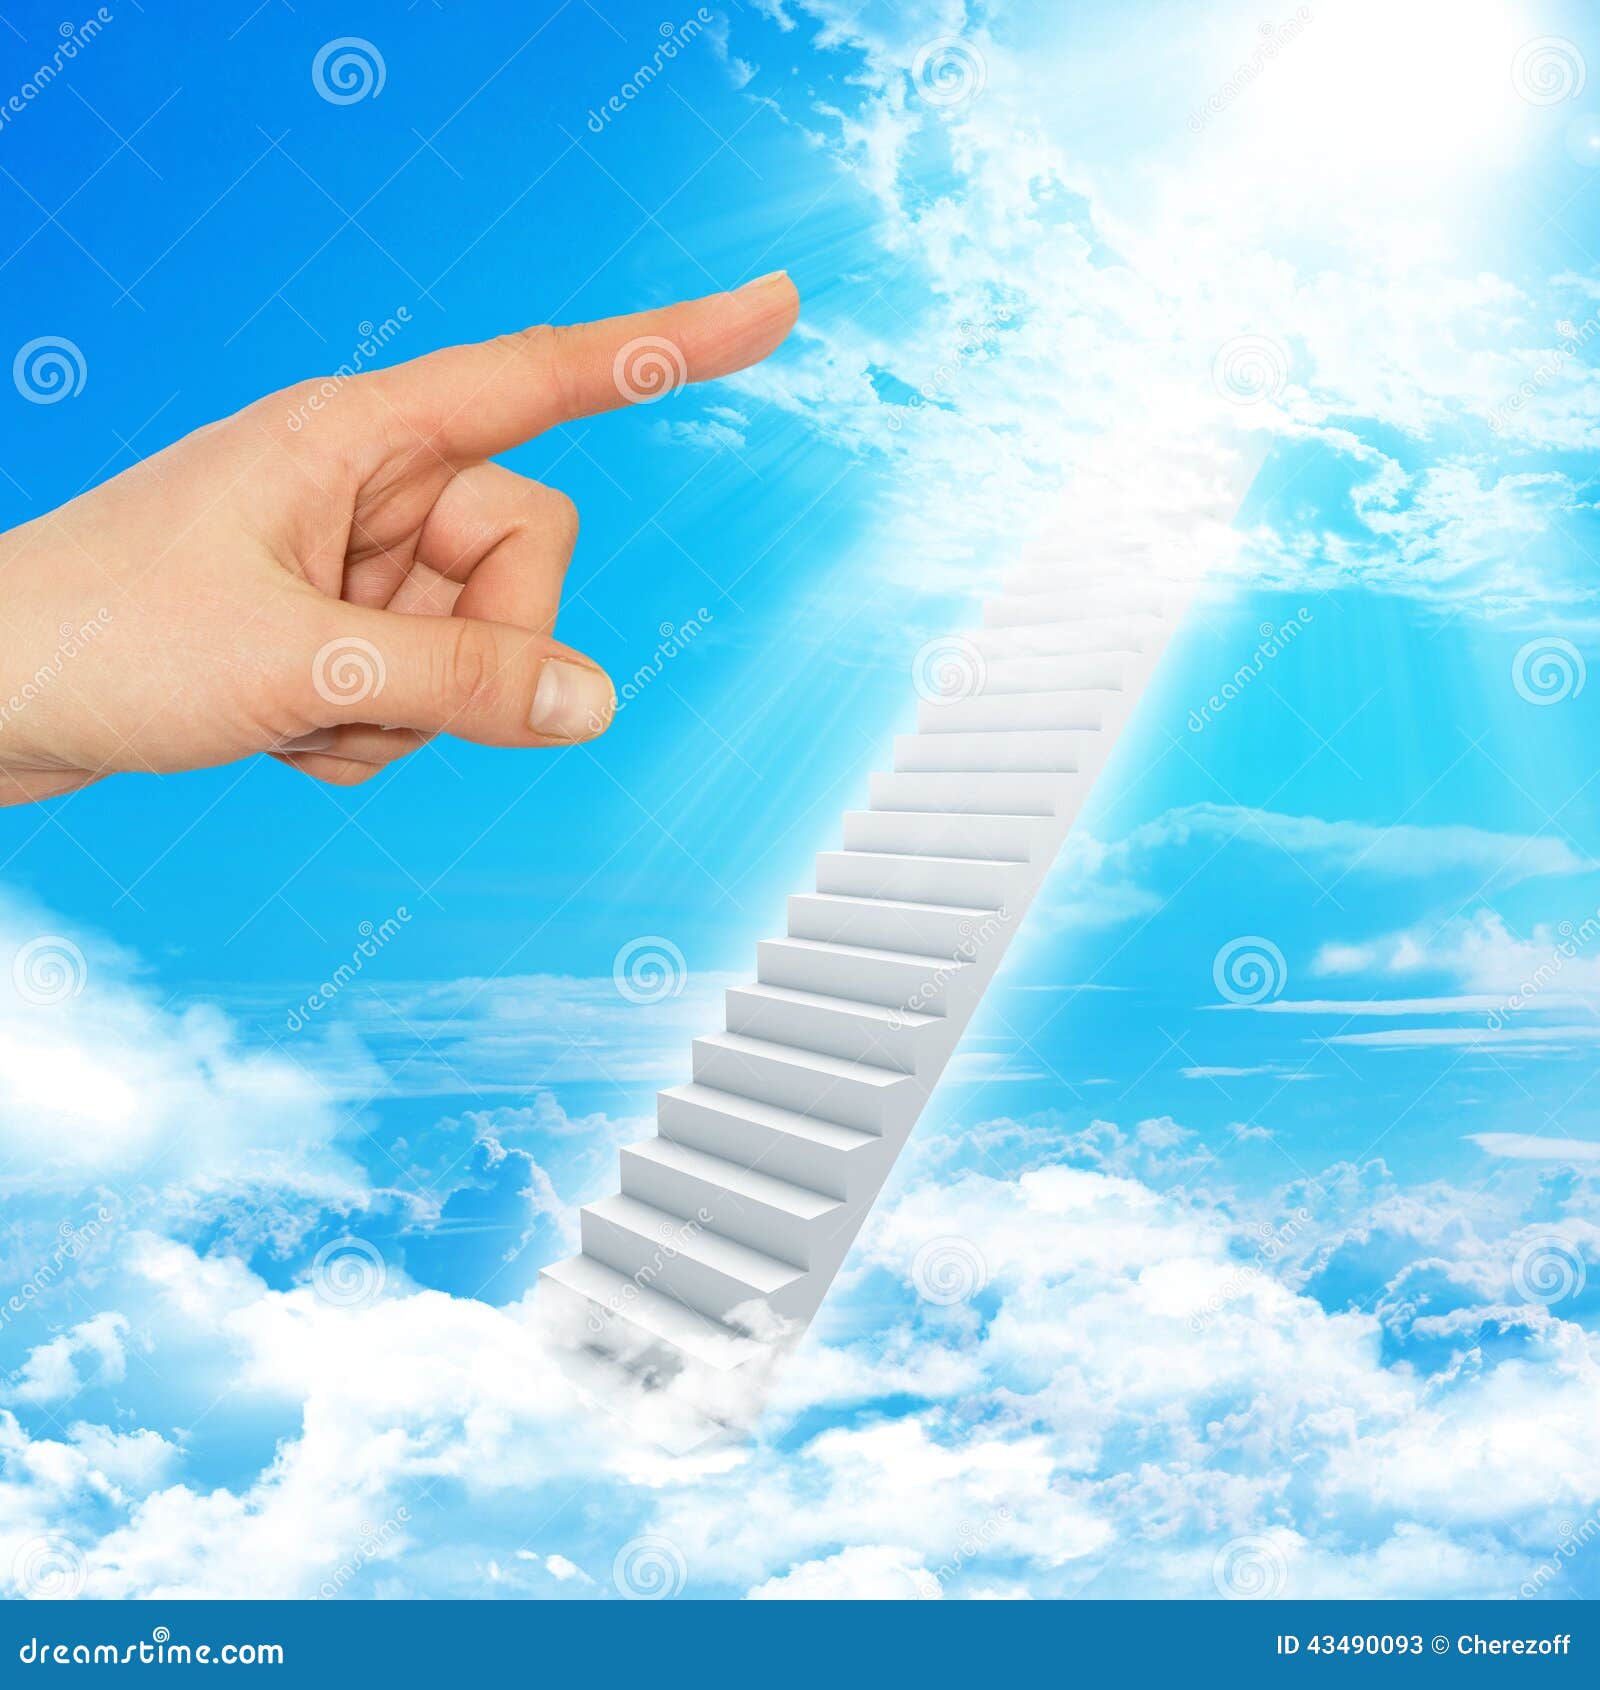 Finger Indicates Stairway To Heaven Stock Image - Image of high, light:  43490093